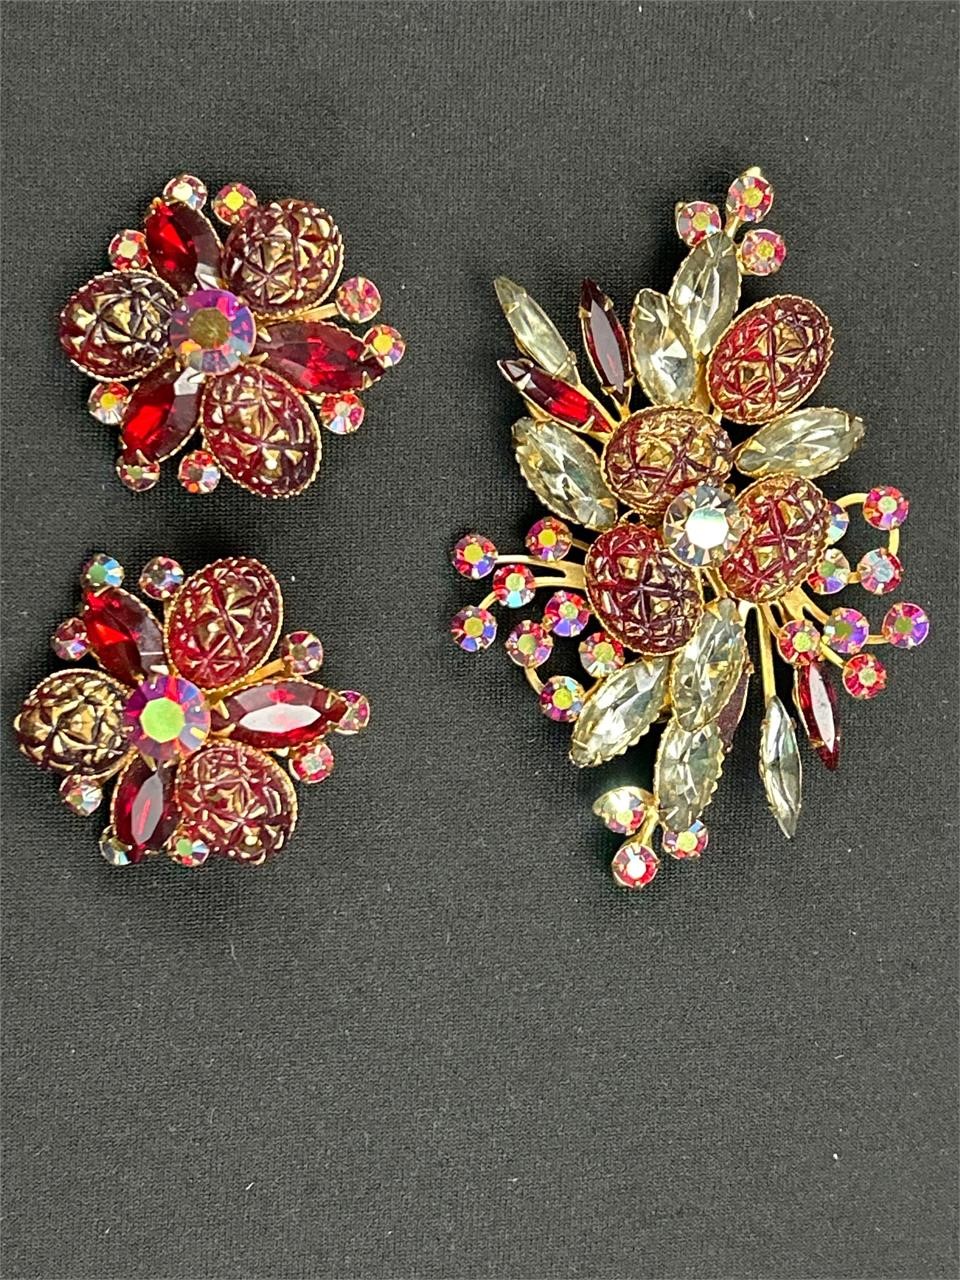 VTG BEAUJEWELS BROOCH AND CLIP ON EARRINGS SET"